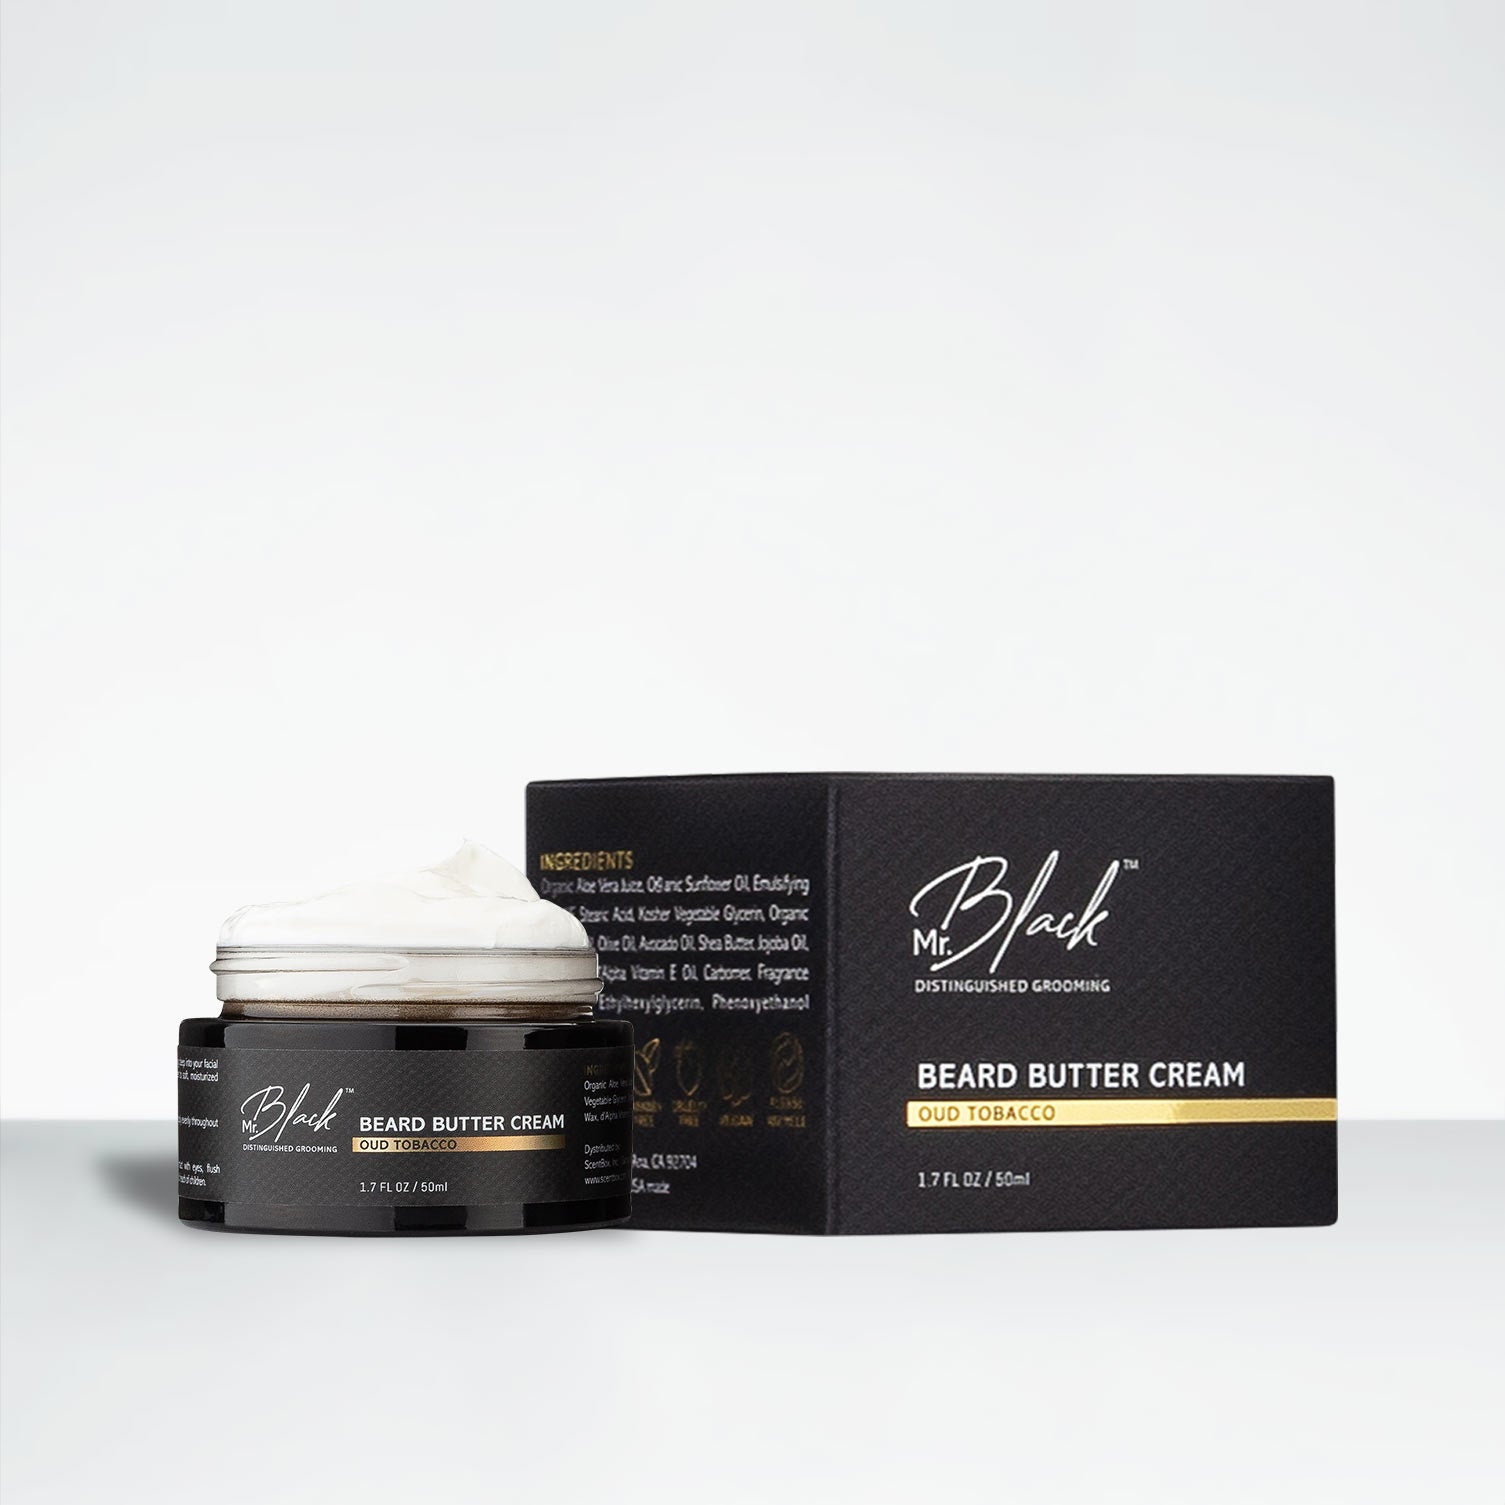 Image of Beard Butter Cream - Oud Tobacco